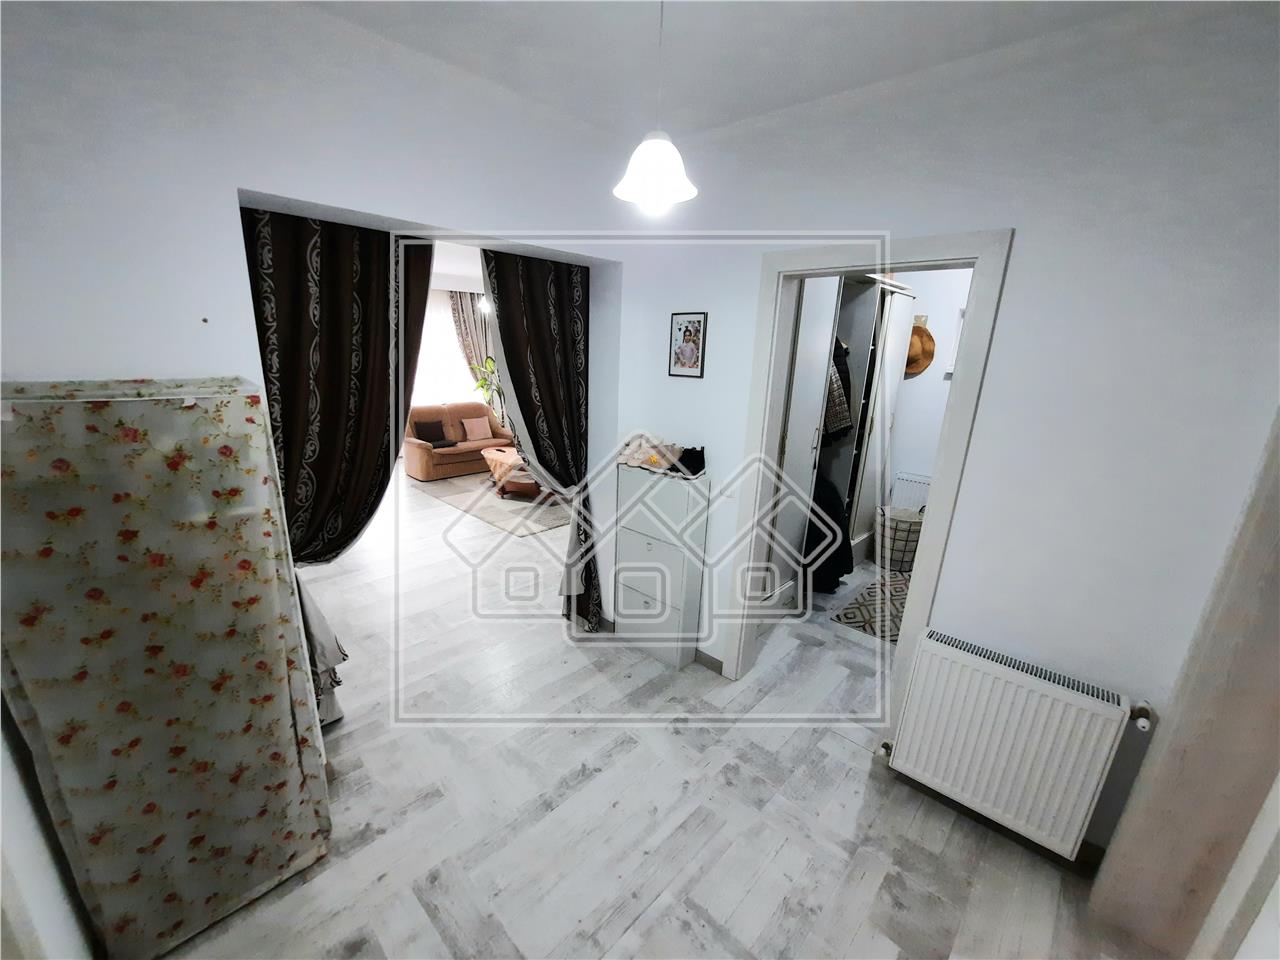 House for sale in Sibiu  - 3 bedrooms - Ampoi area 3